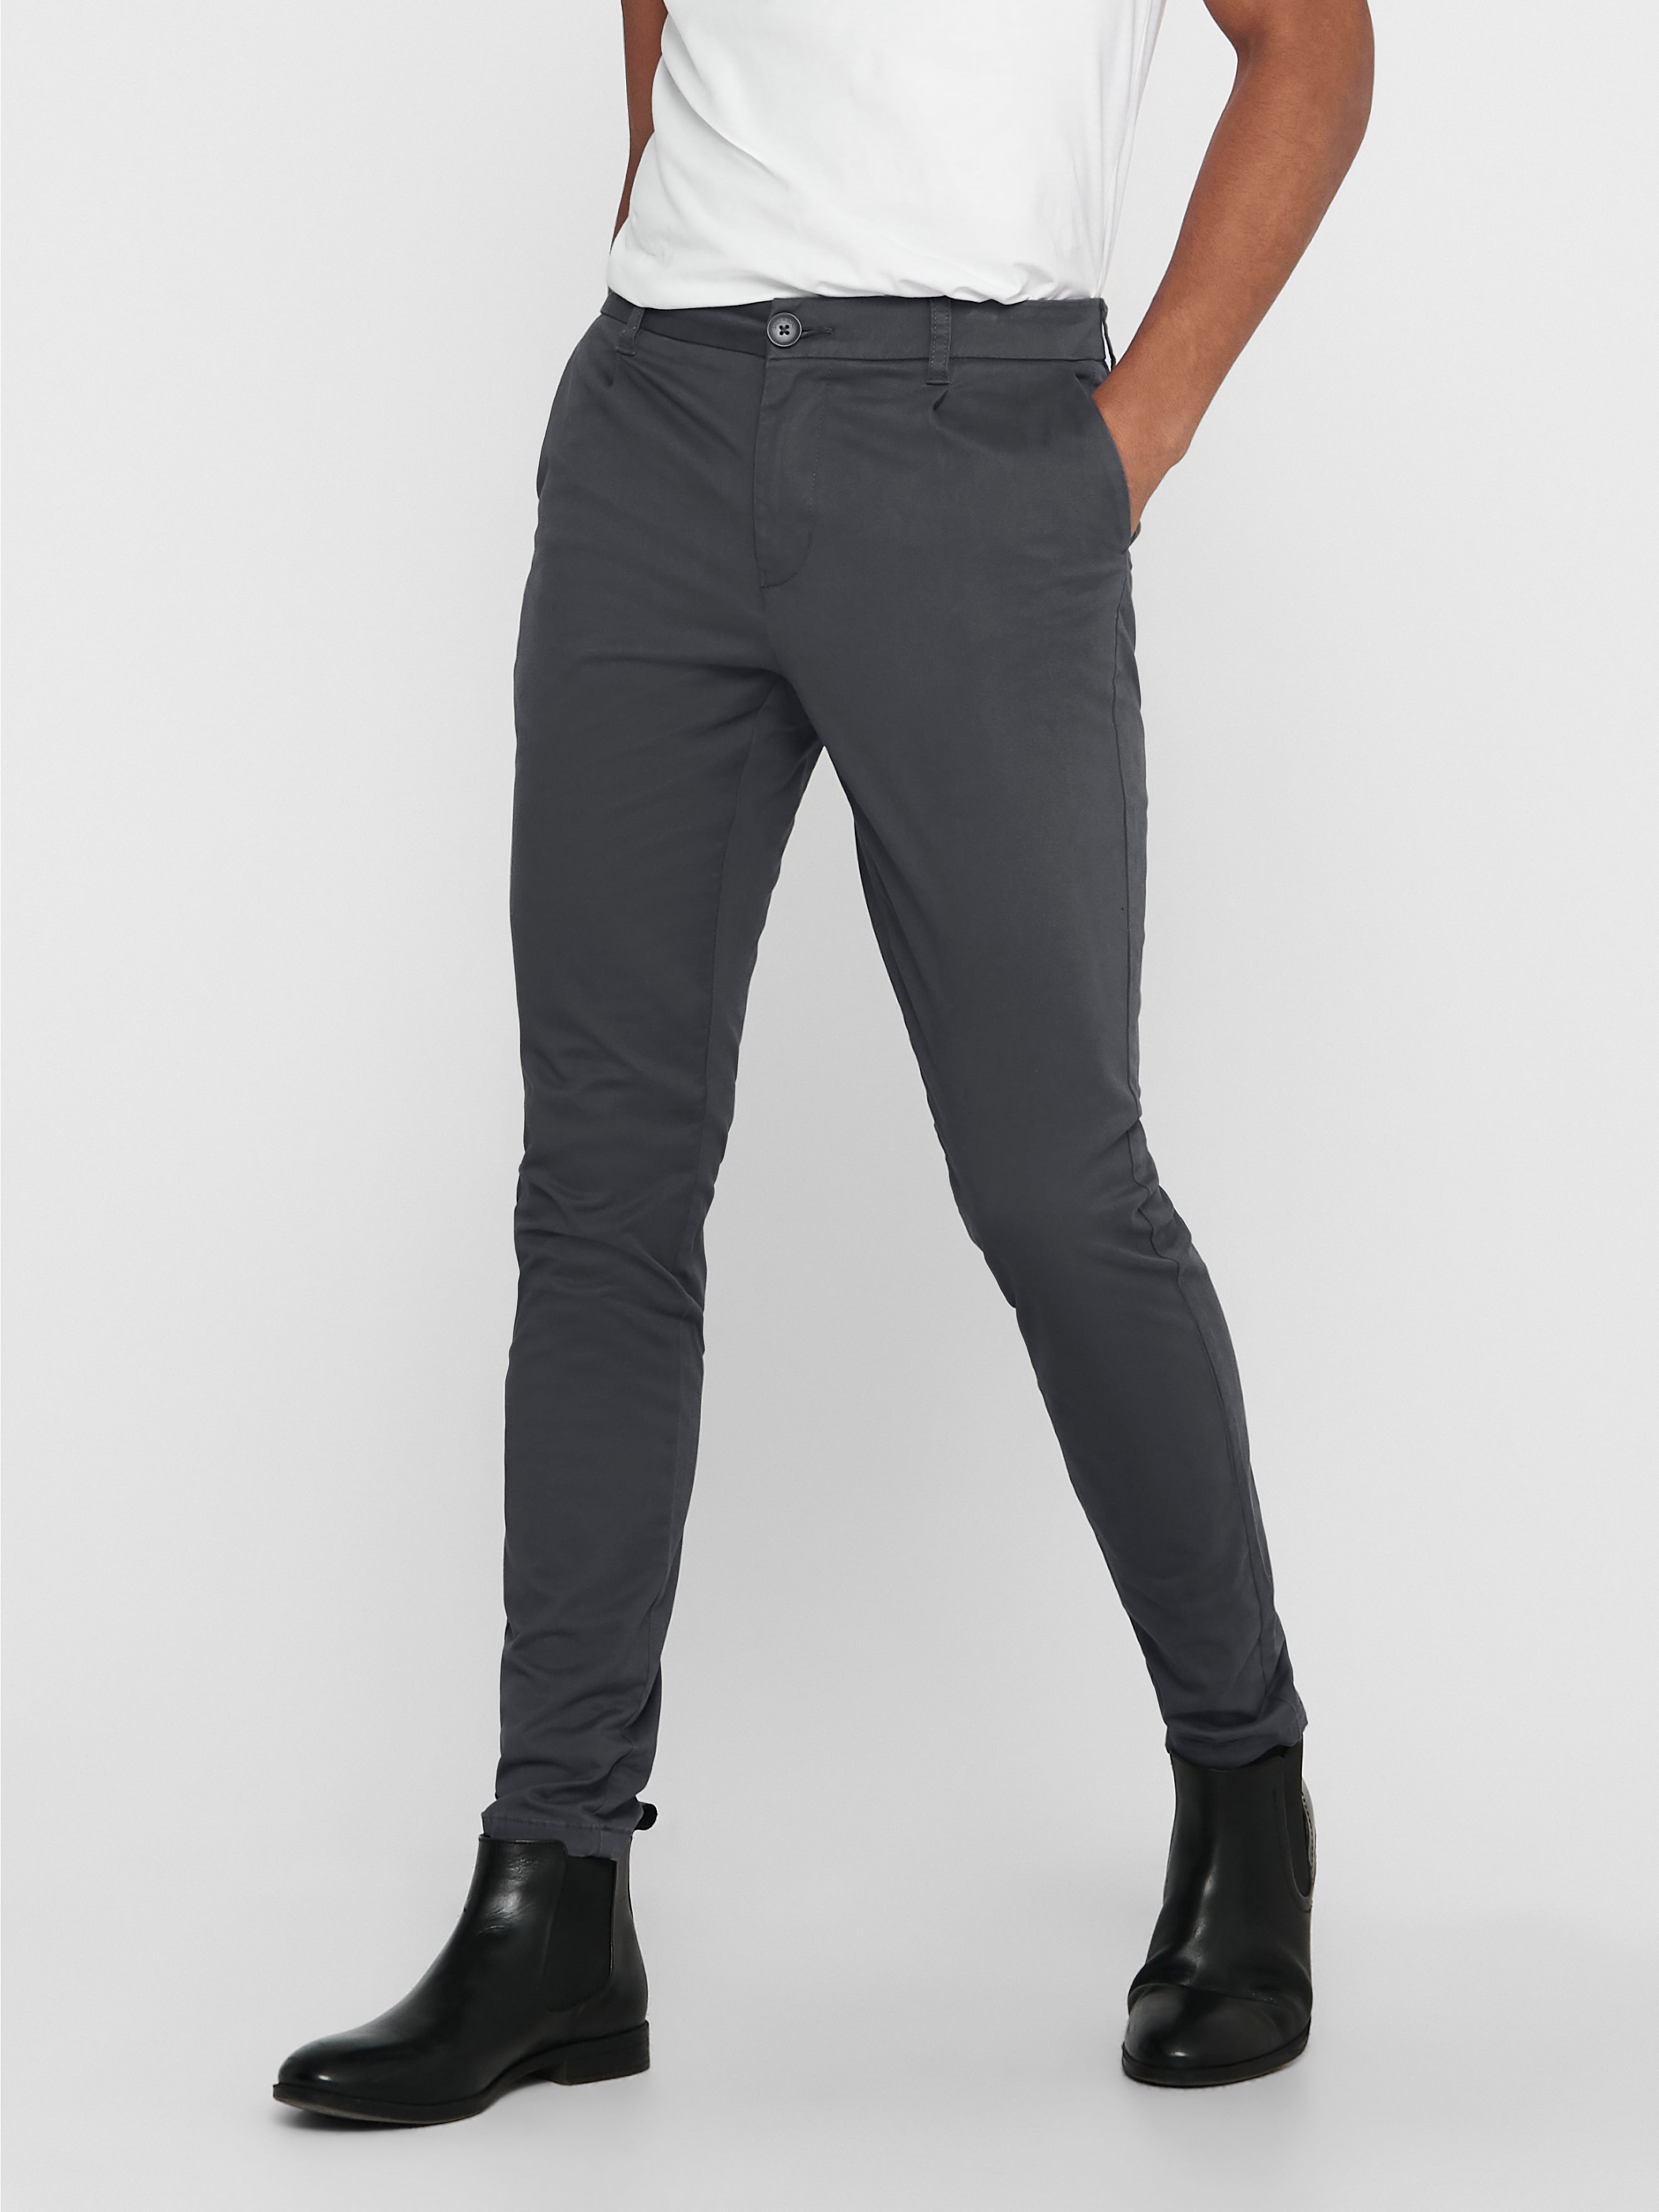 Occasions | Grey Slim Fit Suit Trousers | SuitDirect.co.uk